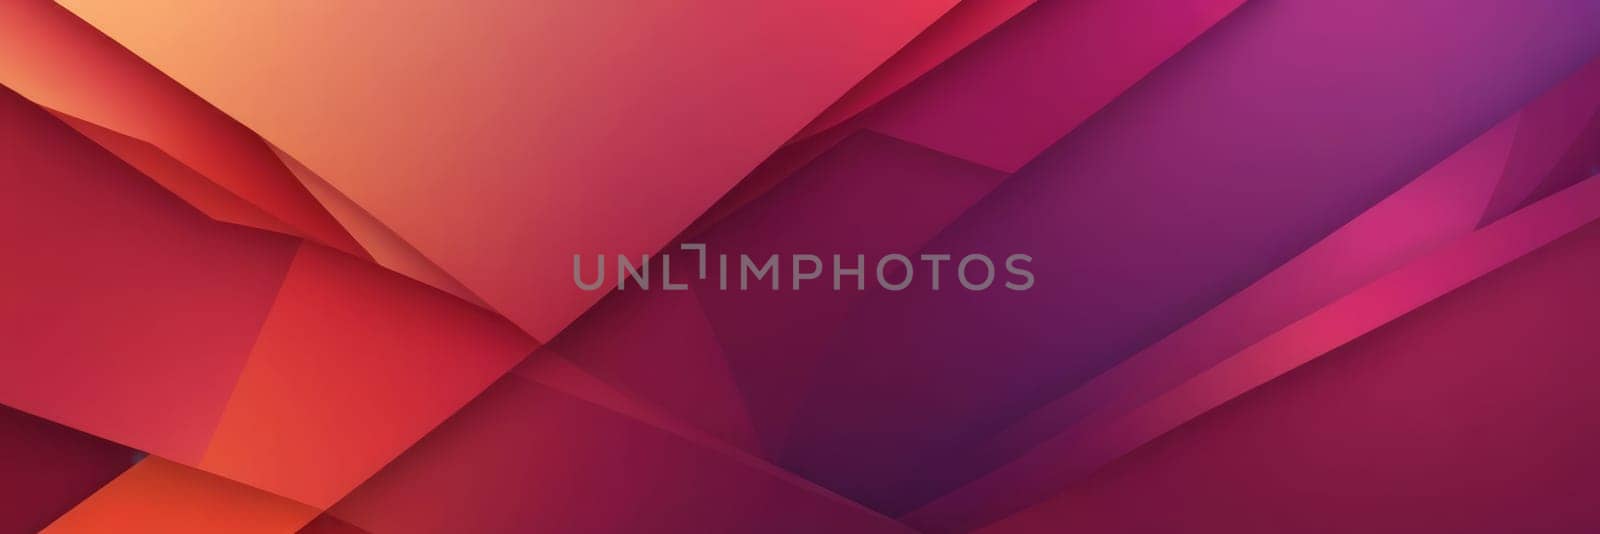 Maroon Layered Shapes Gradient Wallpaper by nkotlyar